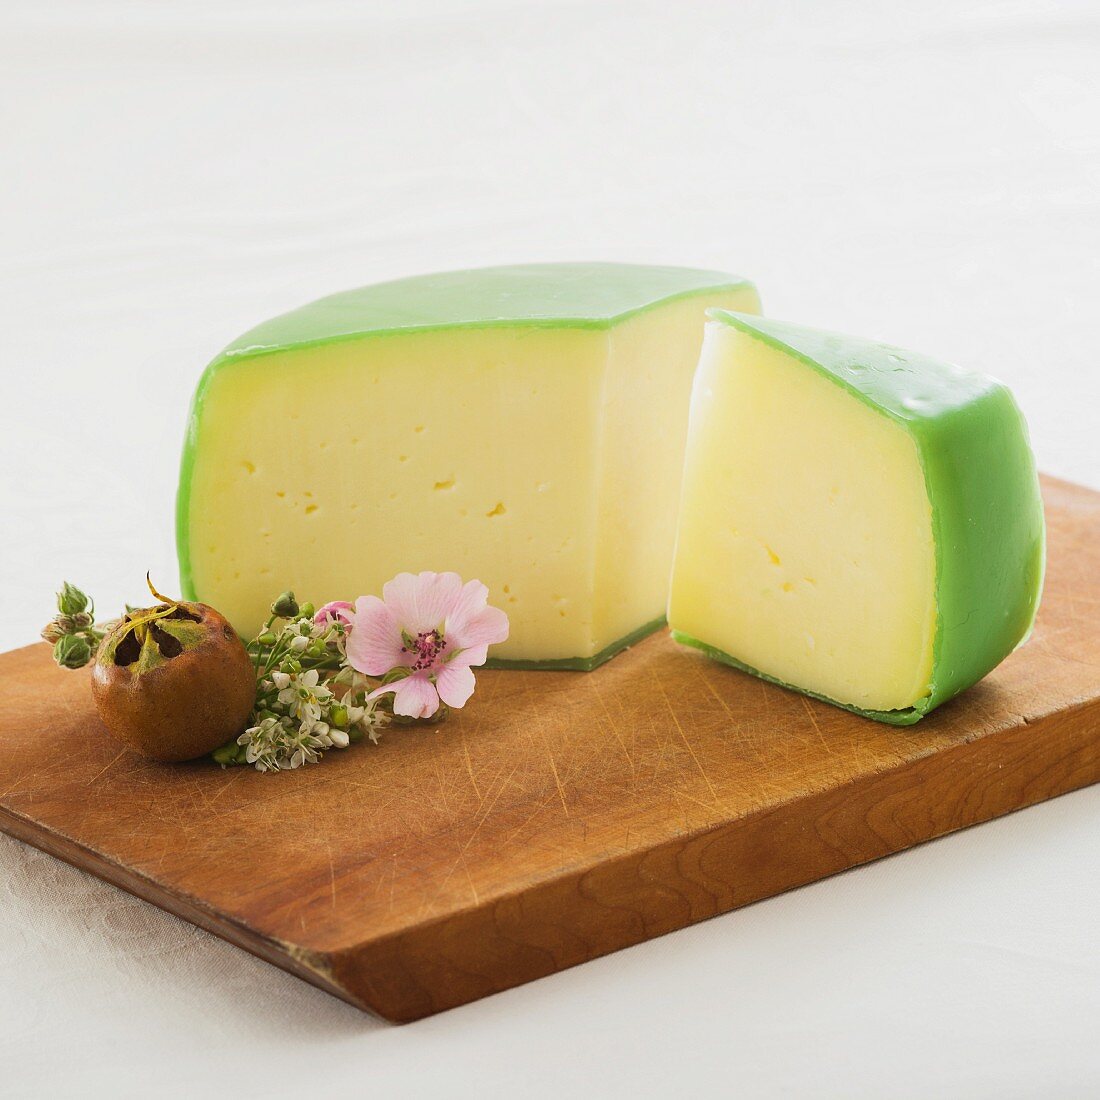 Organic cheese with a green rind